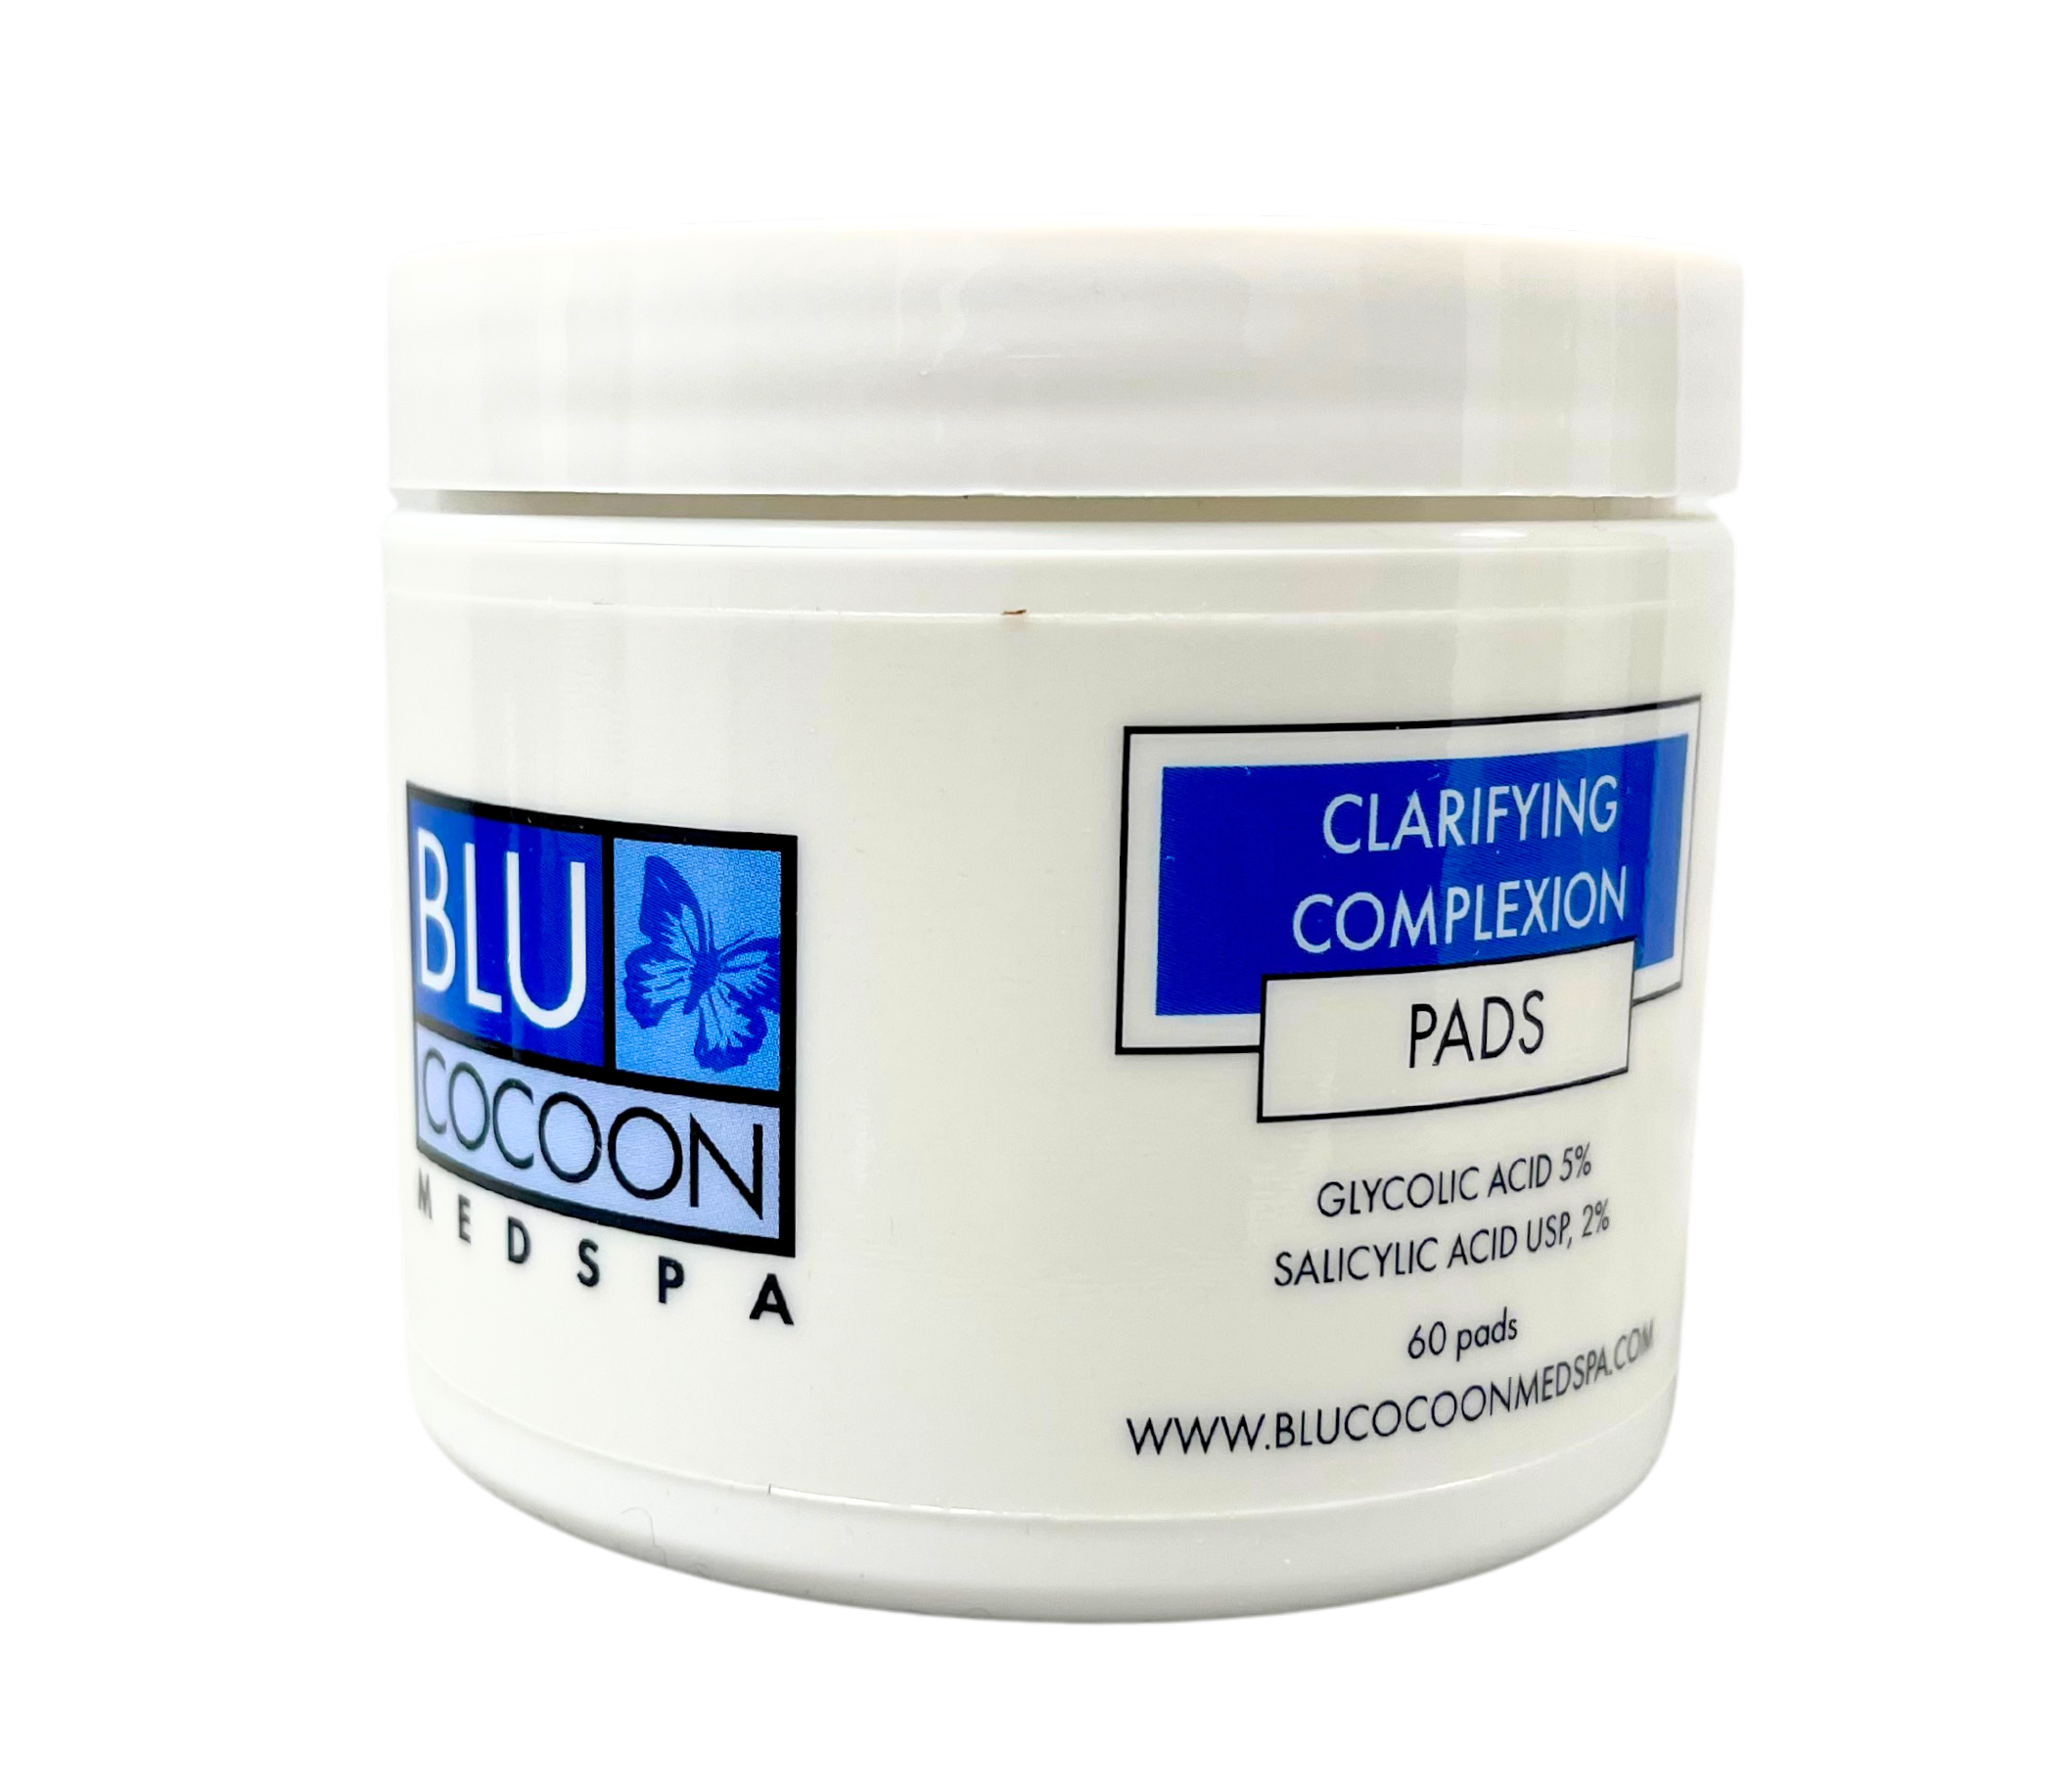 Clarifying Complexion Pads by Blu Cocoon